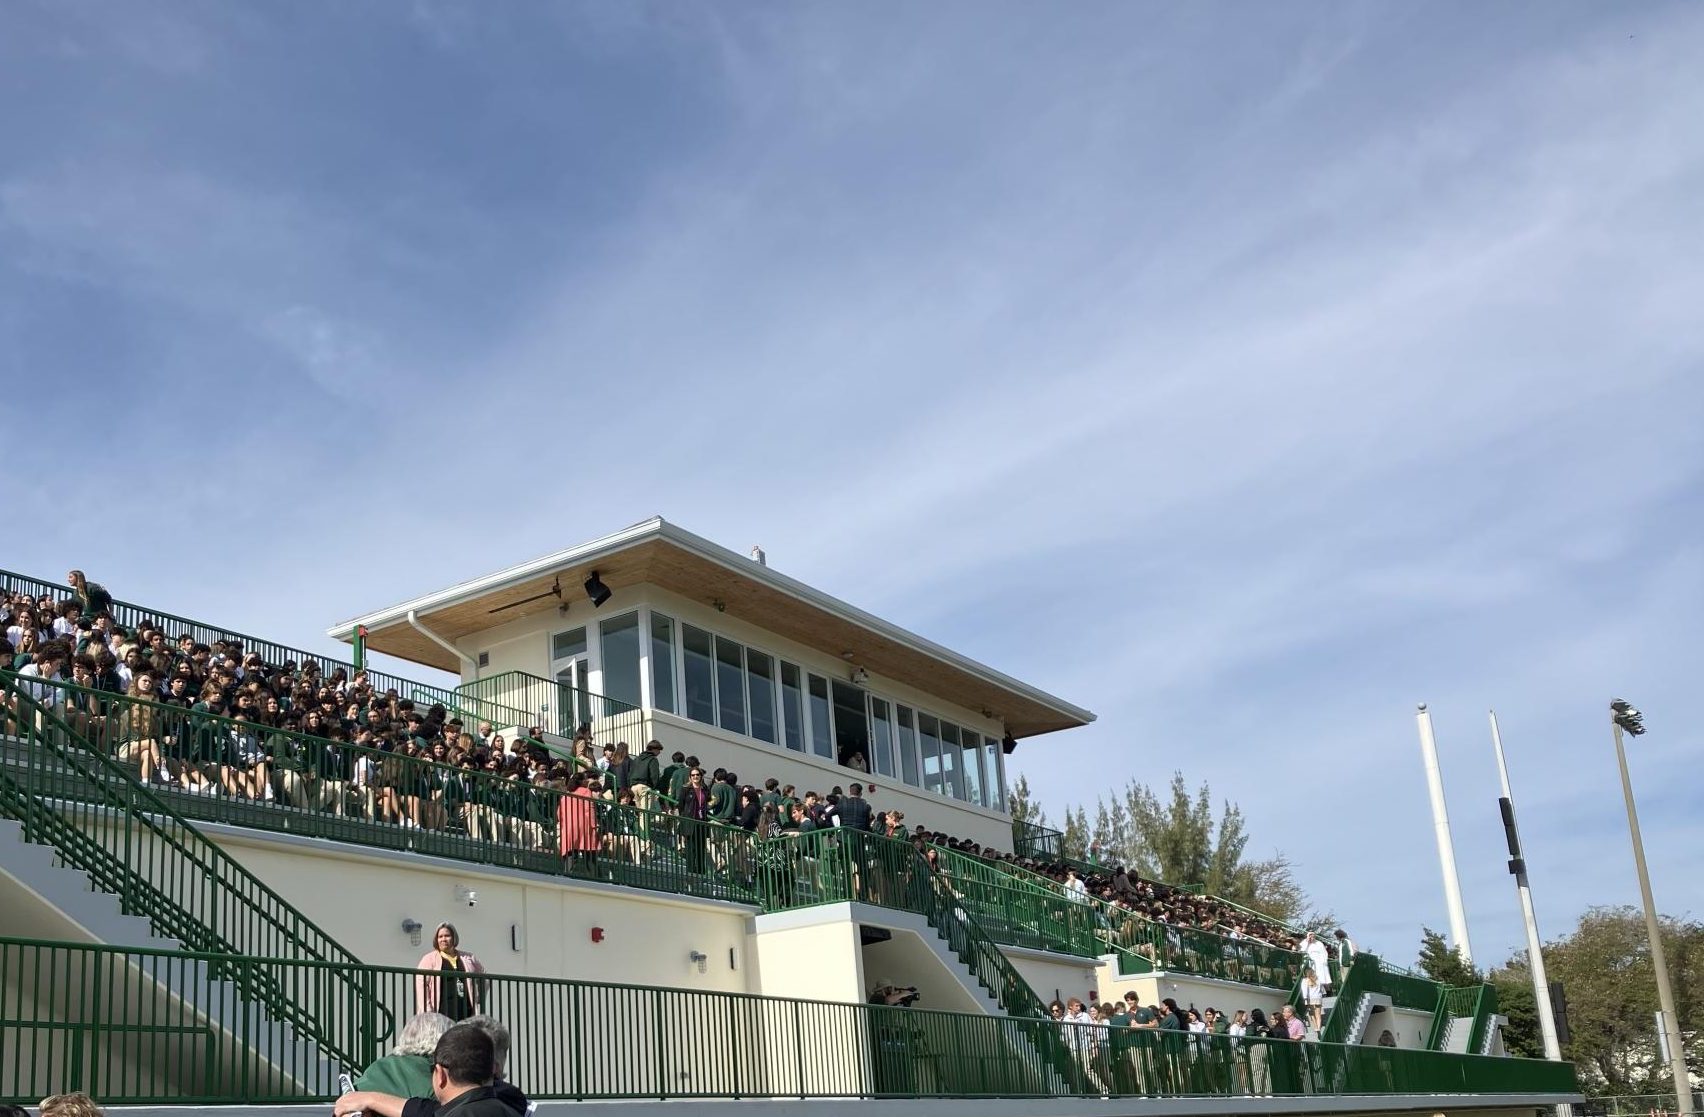 The brand new Grosso Parsons stadium is large enough to accommodate the entire school population.